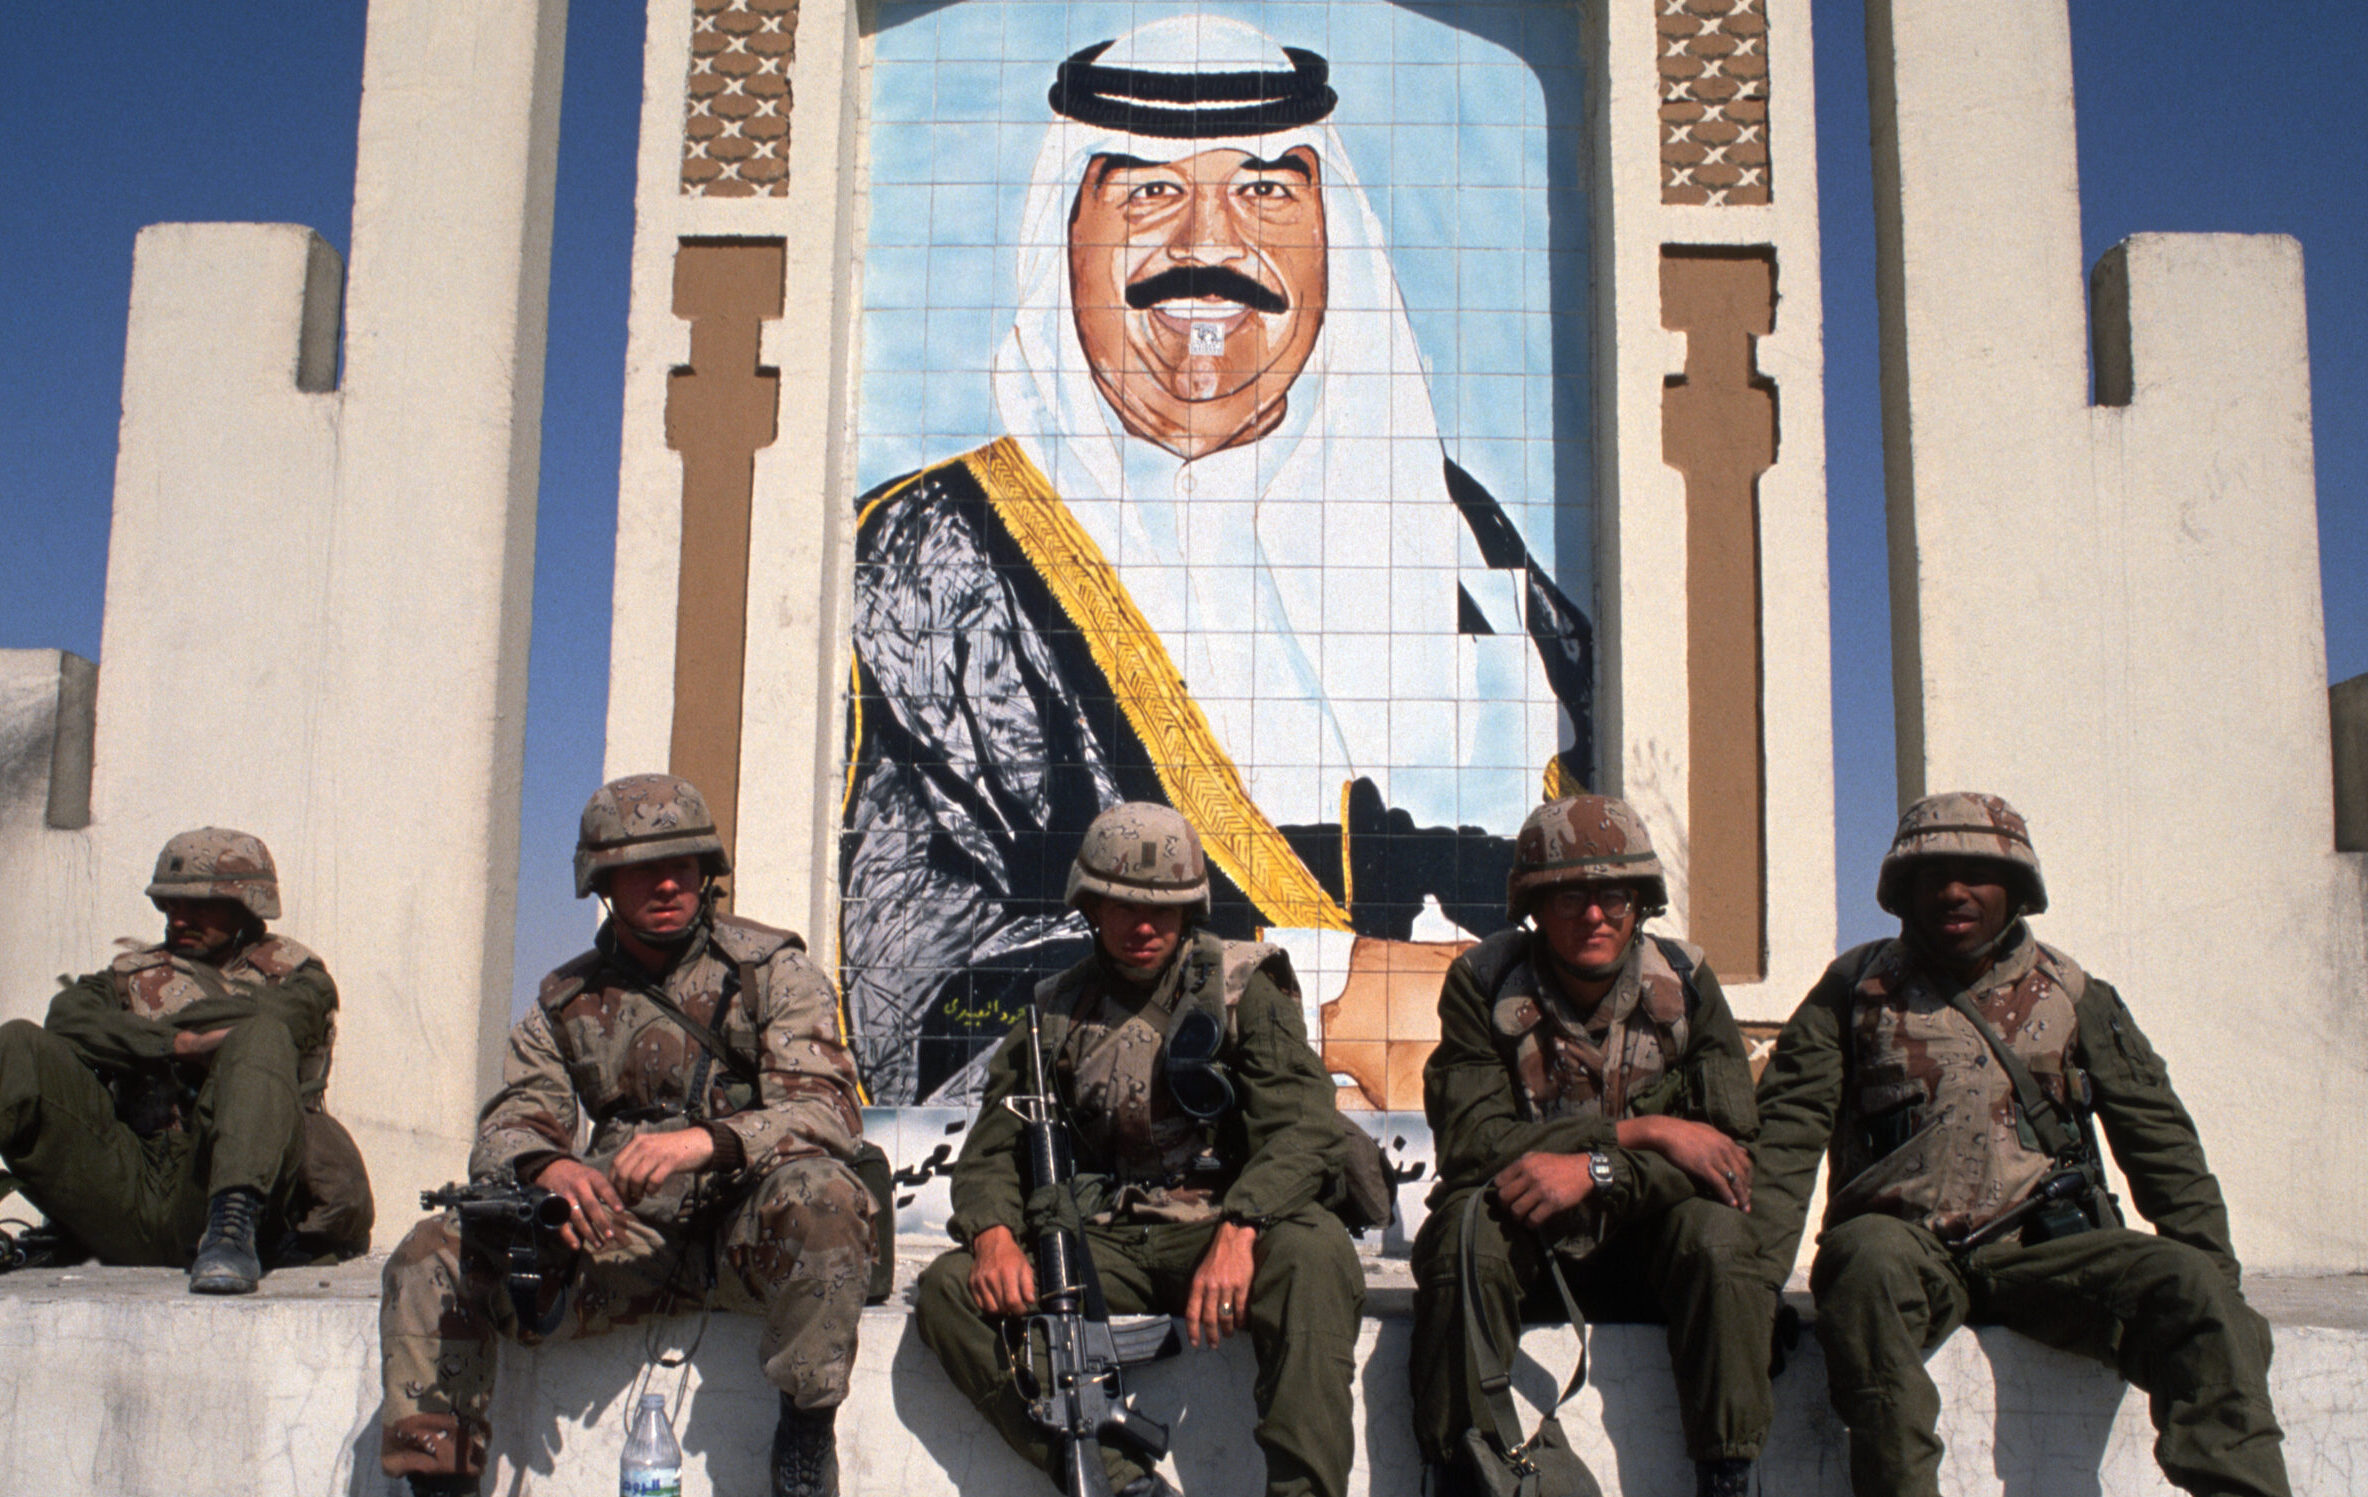 American Soldiers by Portrait of Saddam Hussein